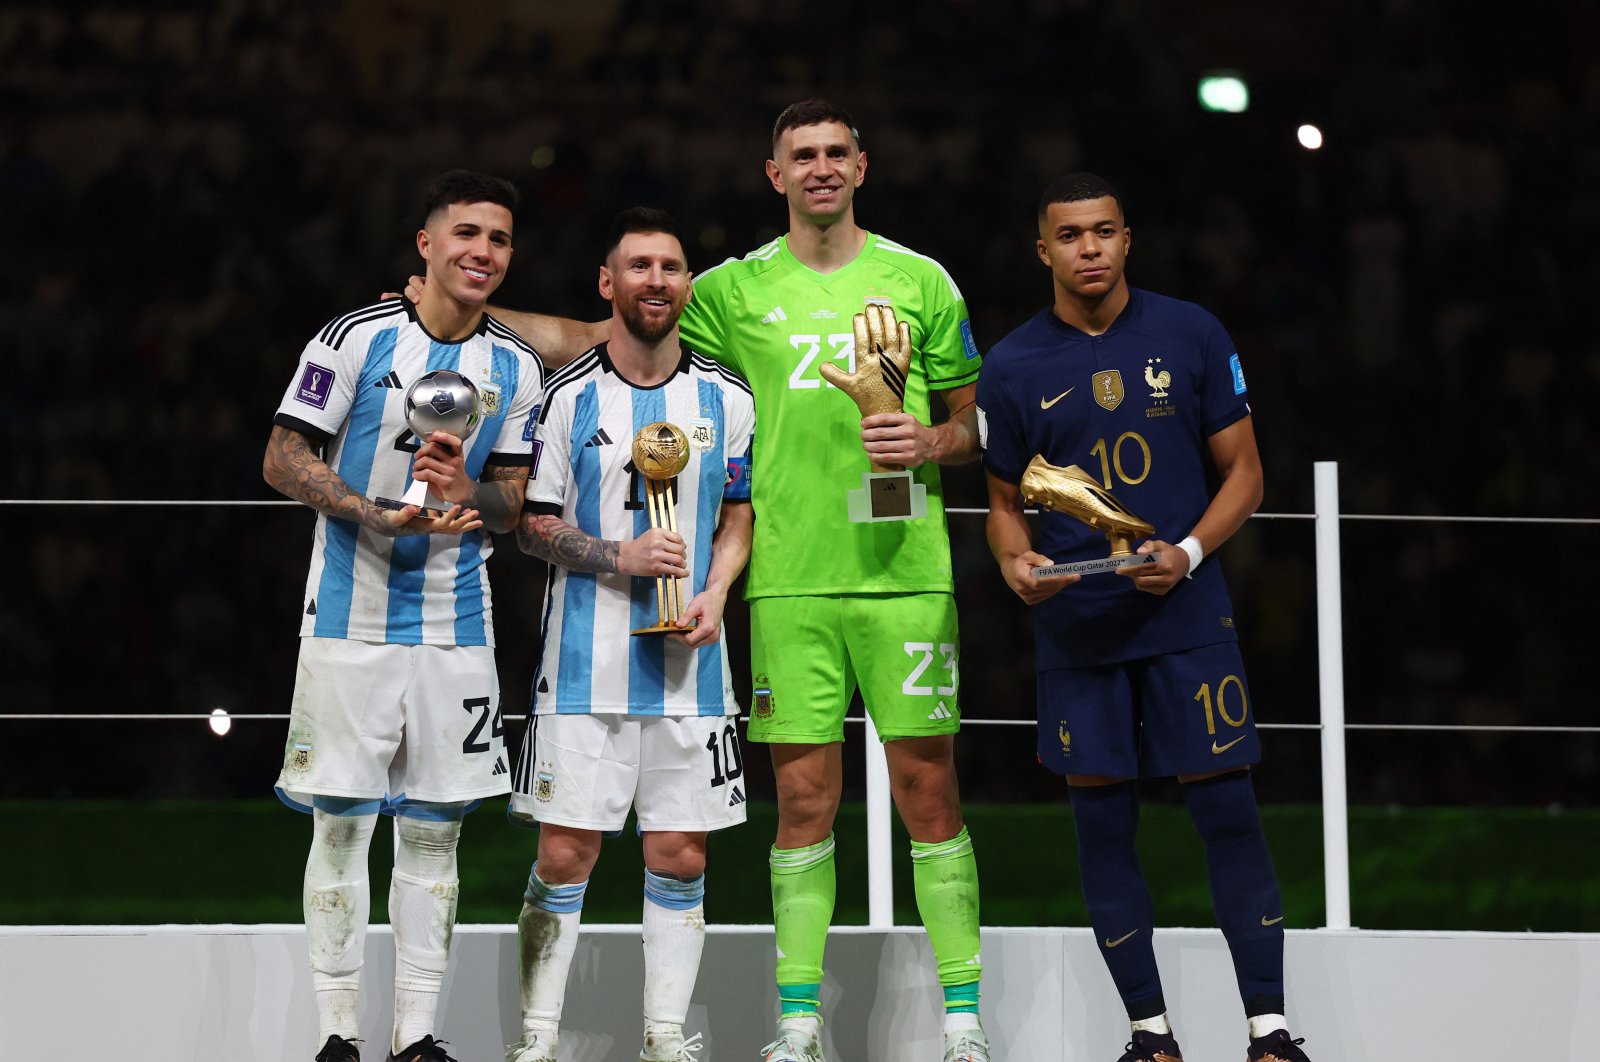 From left, Argentina&#039;s Enzo Fernandez, Argentina&#039;s Lionel Messi, Argentina&#039;s Emiliano Martinez and France&#039;s Kylian Mbappe pose after being awarded the Best Young Player, Golden Ball, Golden Glove and Golden Boot, respectively, after the FIFA World Cup Qatar 2022 final match between Argentina and France at Lusail Stadium, Lusail, Qatar, December 18, 2022. (Reuters Photo)